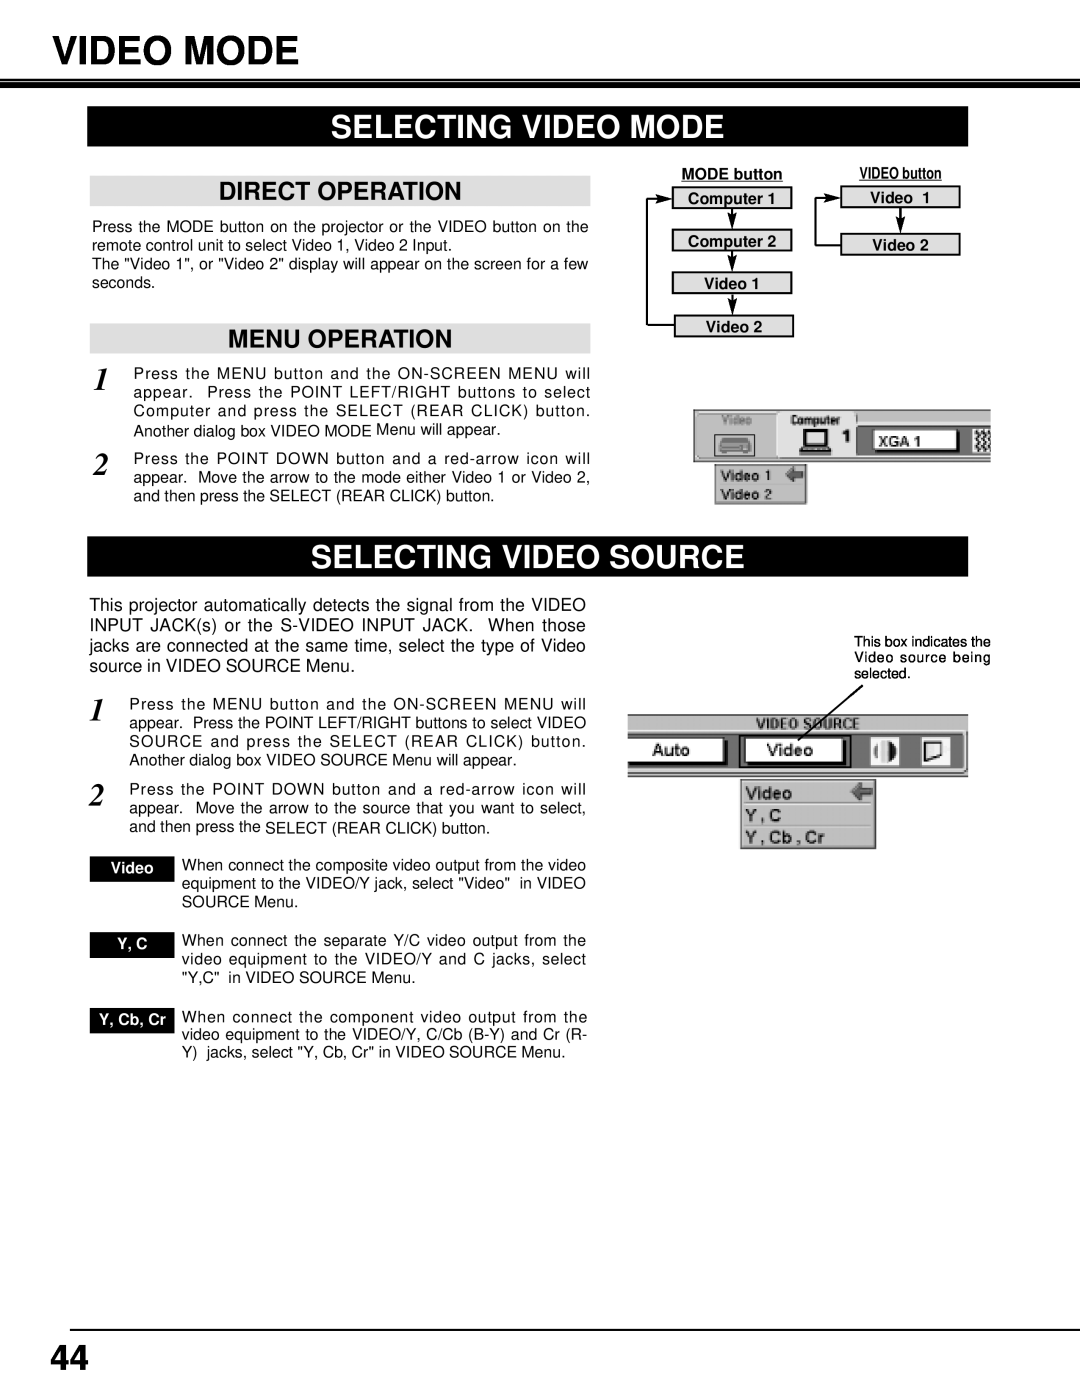 Eiki LC-X3/X3L Selecting Video Mode, Selecting Video Source, Direct Operation, Menu Operation, Y, Cb, Cr 